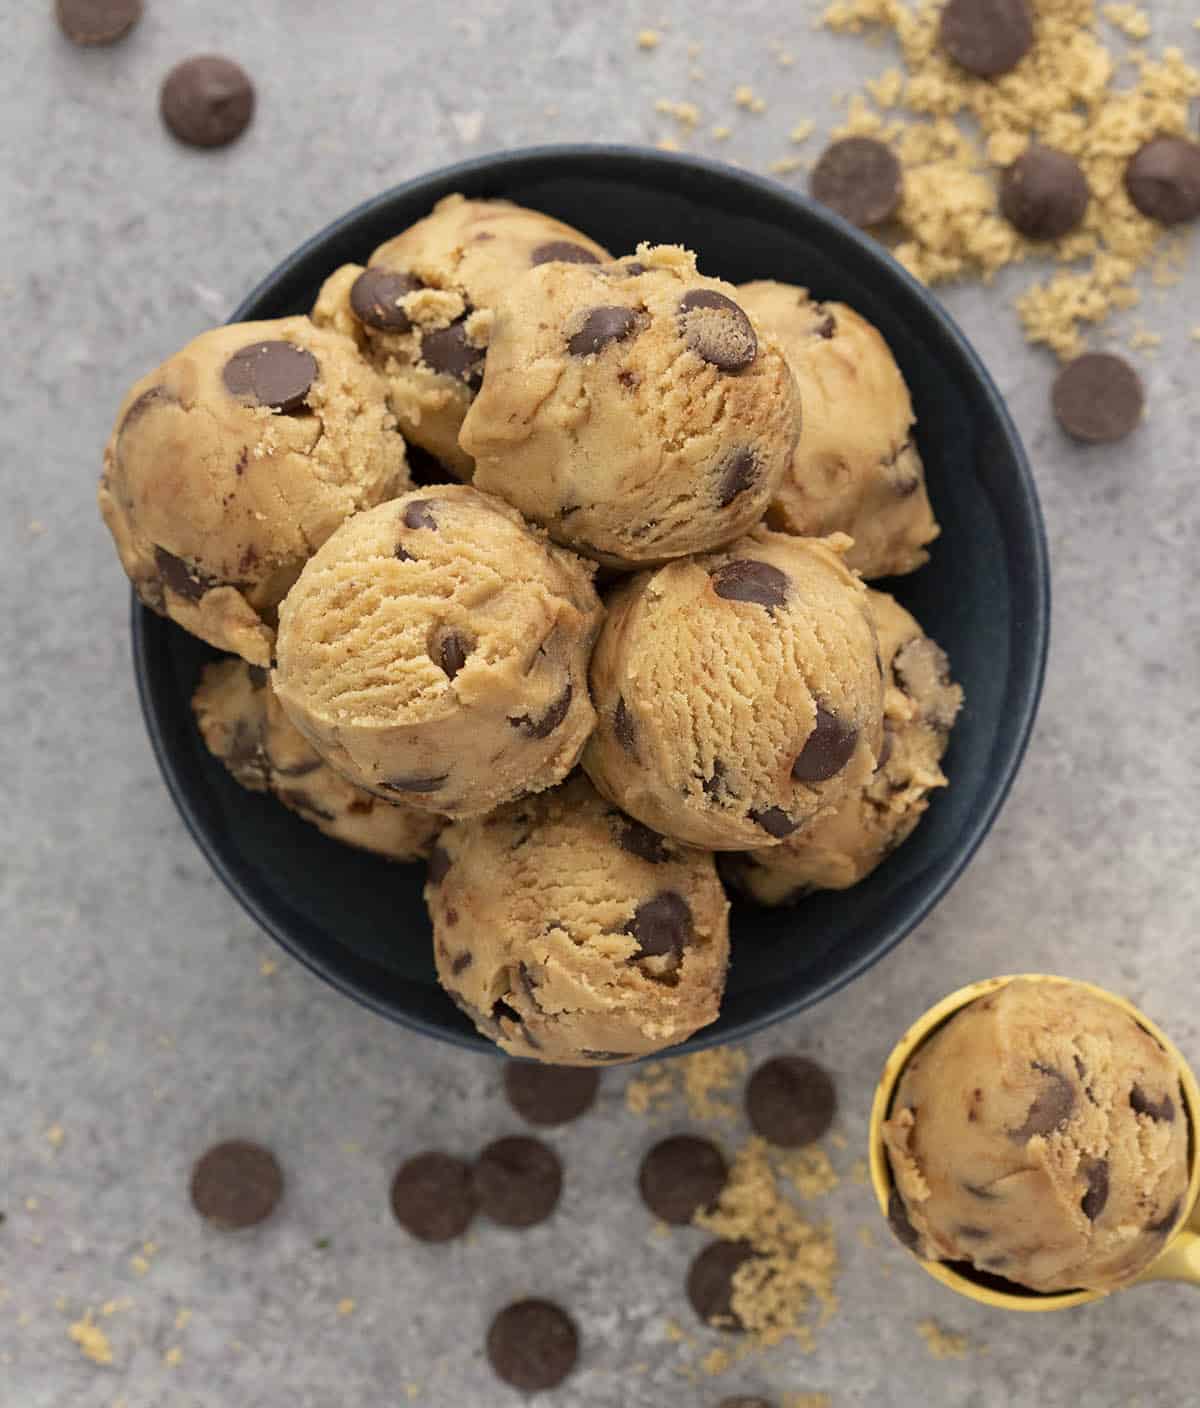 Scoops of cookie dough in a navy bowl.